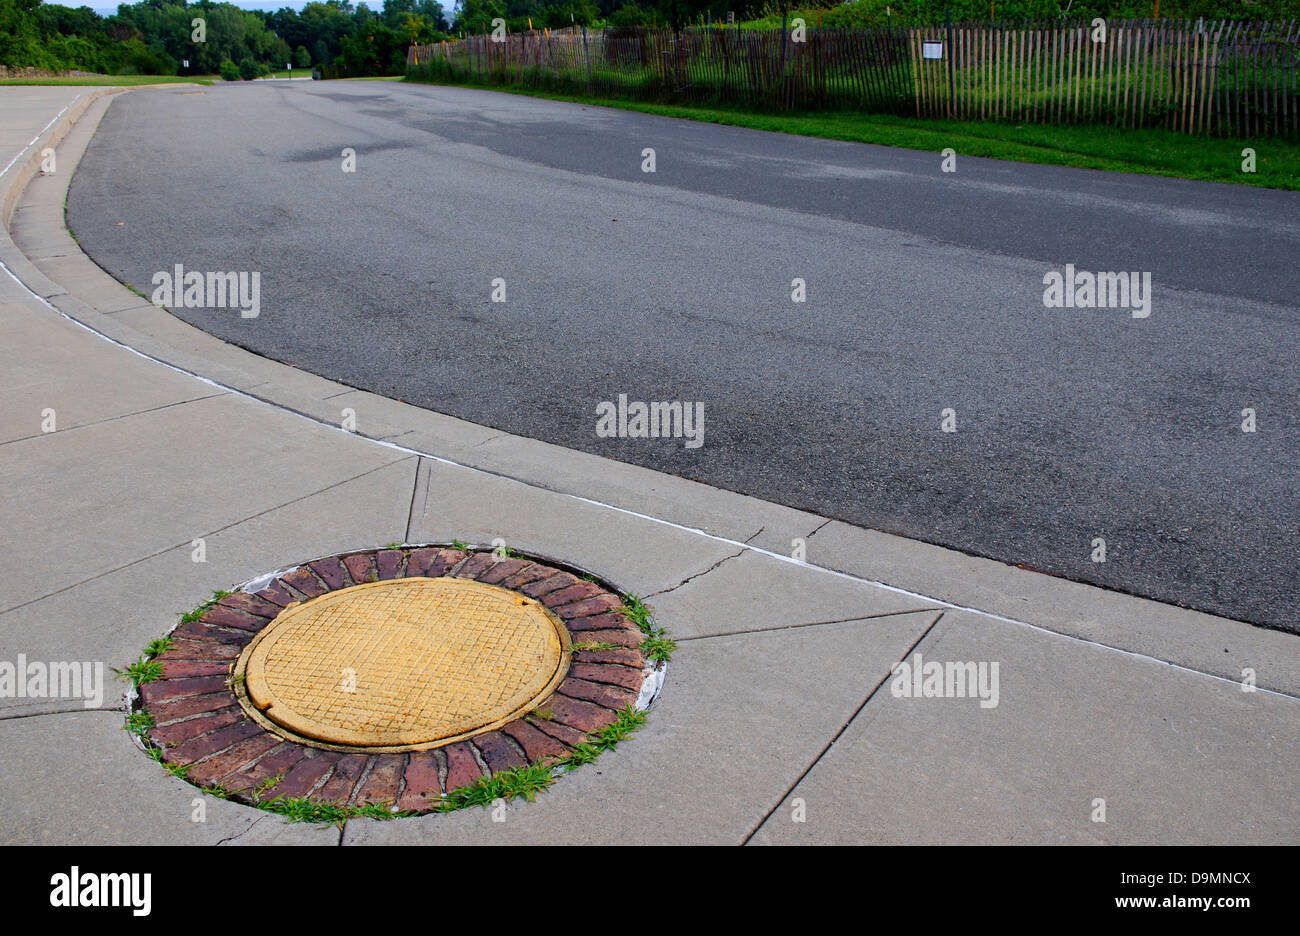 Man hole cover decorated to look like a flower with yellow center and bricks for orange petals in Fort Wadsworth, Staten Island Stock Photo